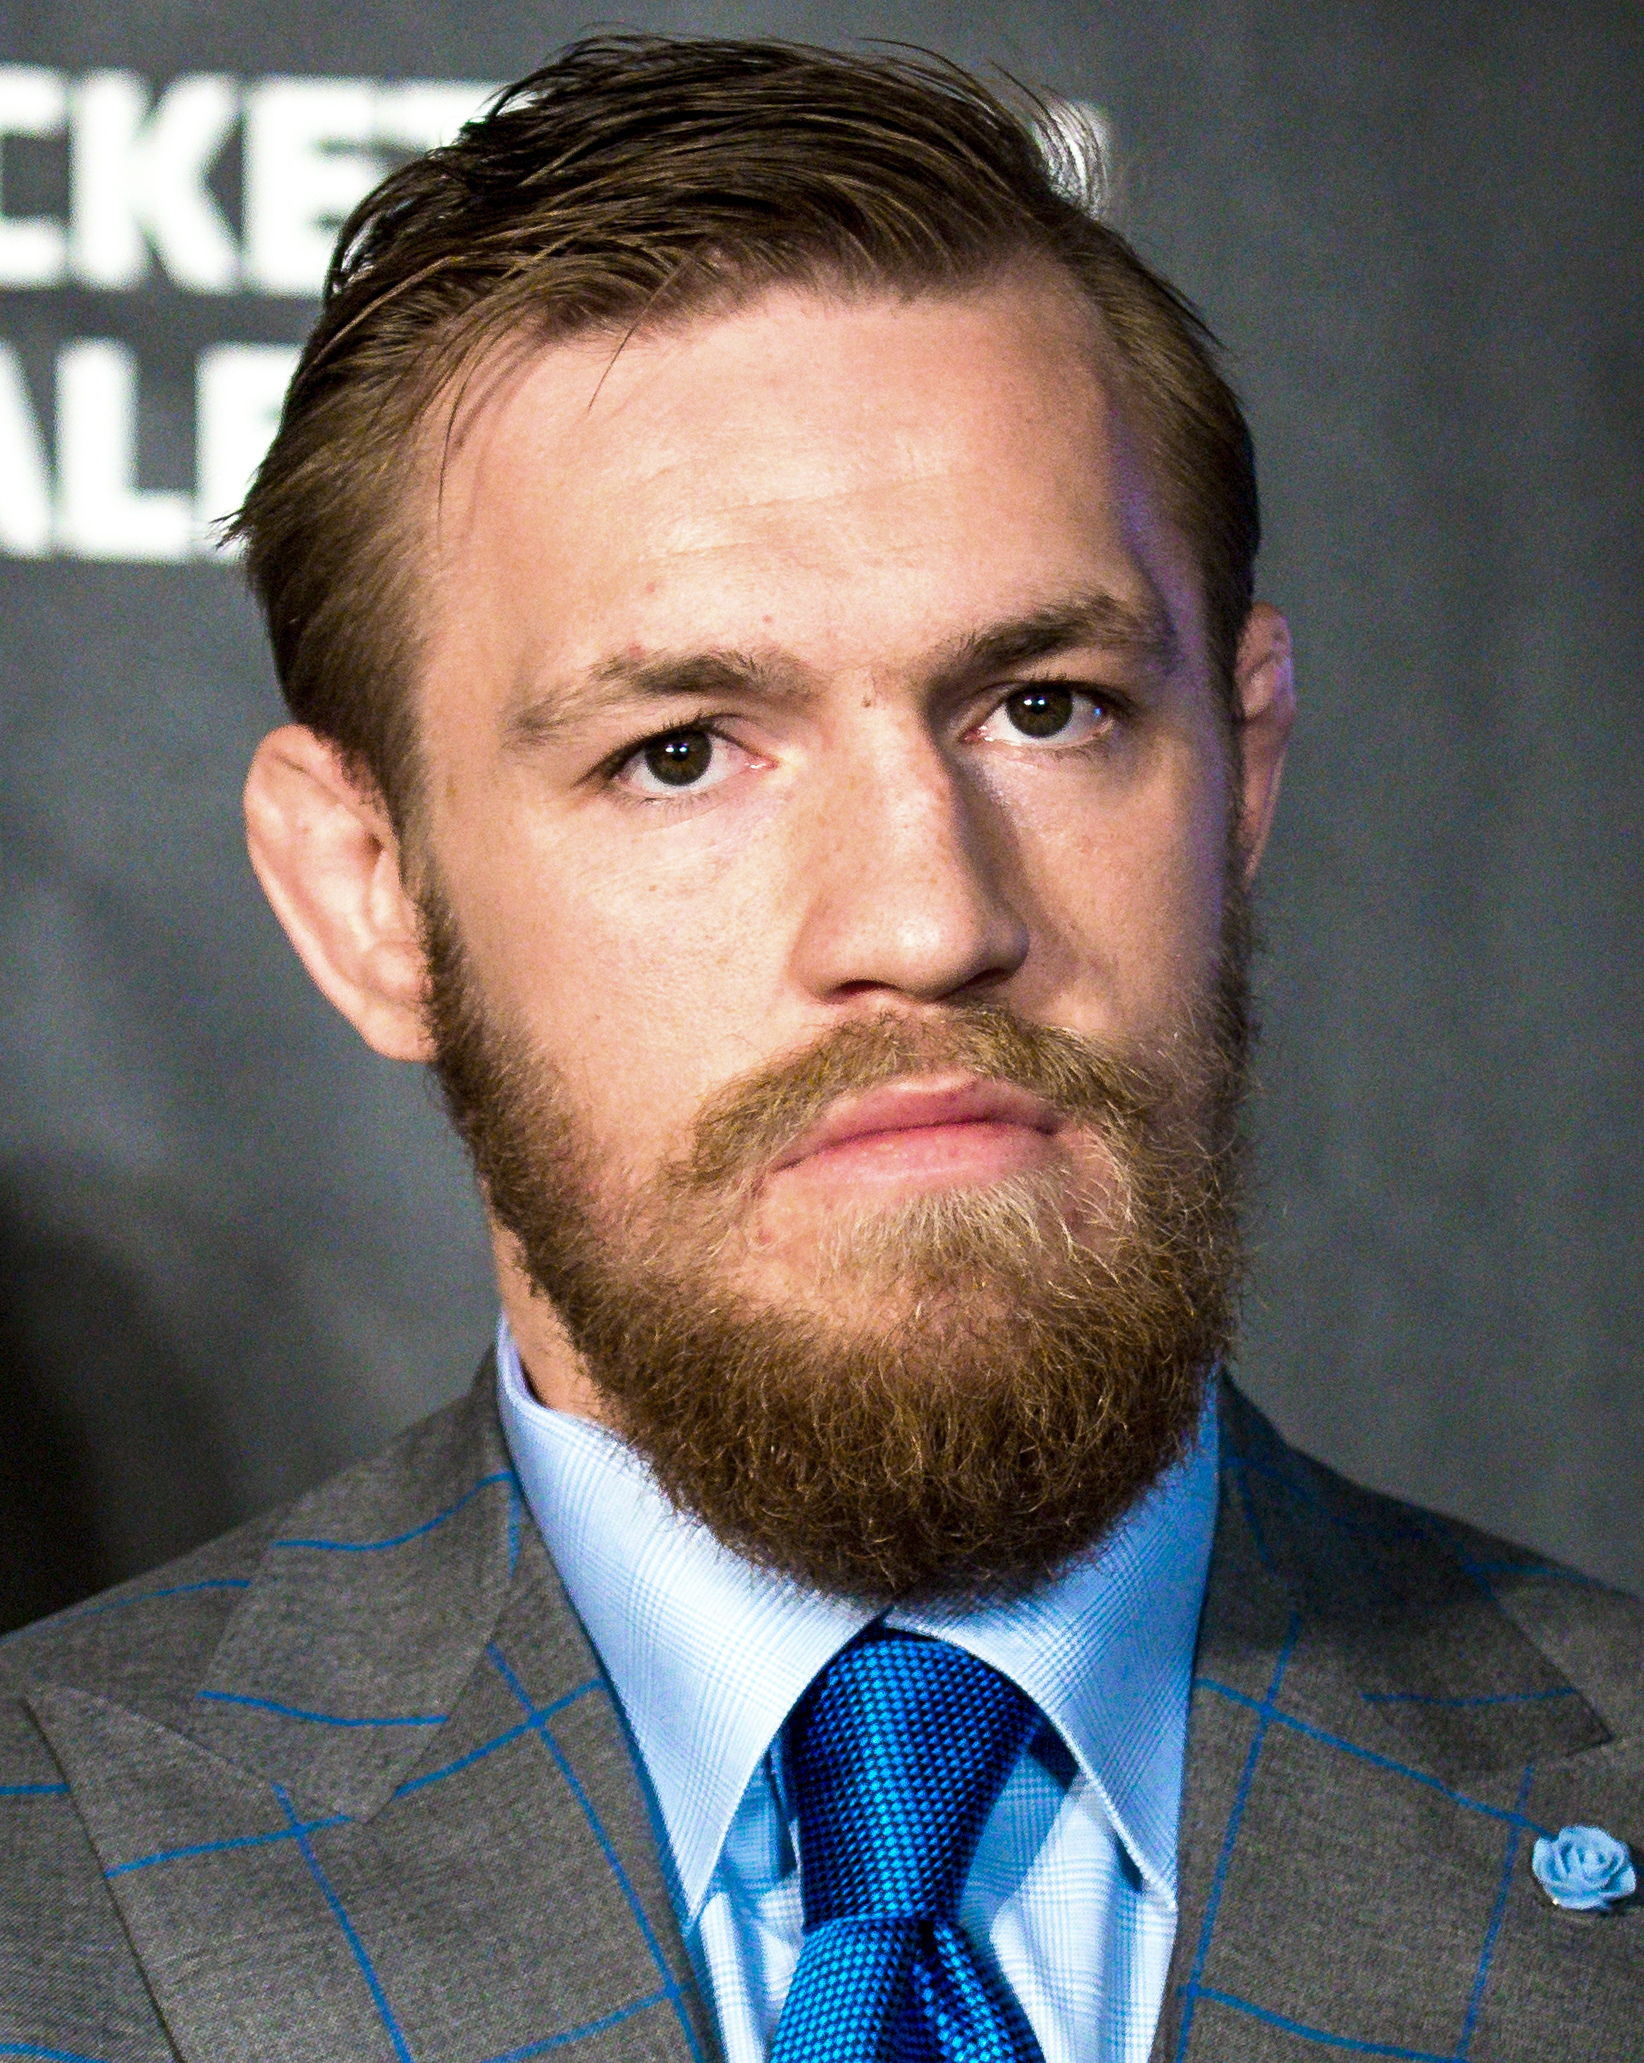 MMMA fighter Conor McGregor arrested for attempted sexual assault and sexual exhibition